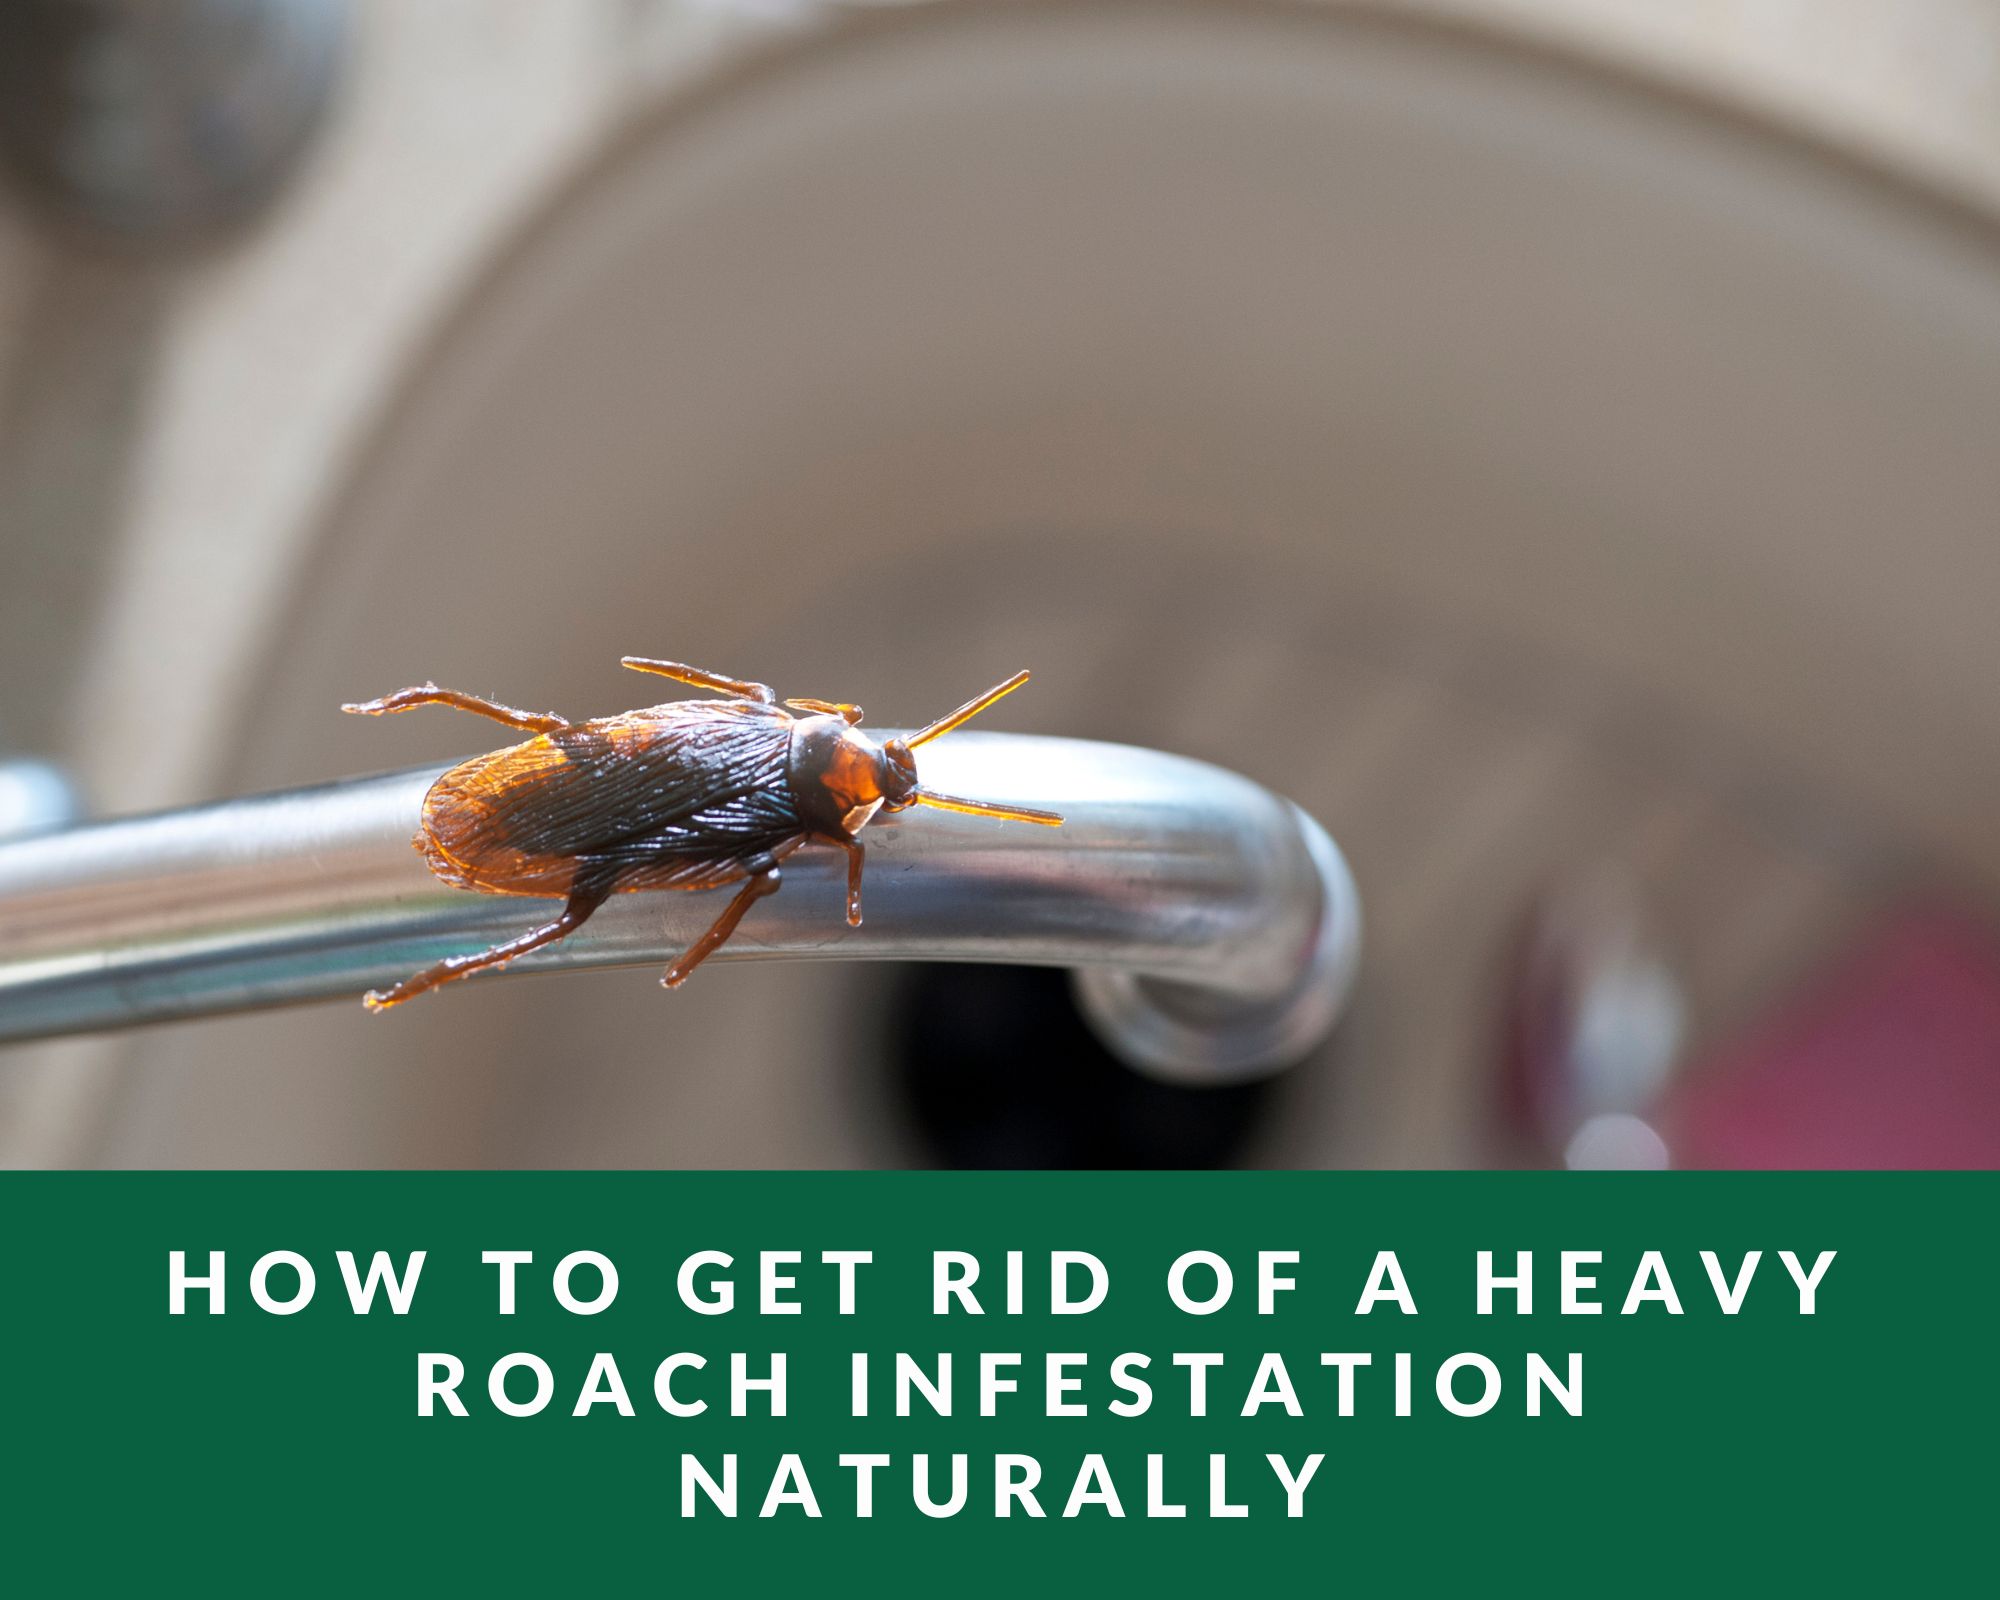 How to get rid of a heavy roach infestation naturally